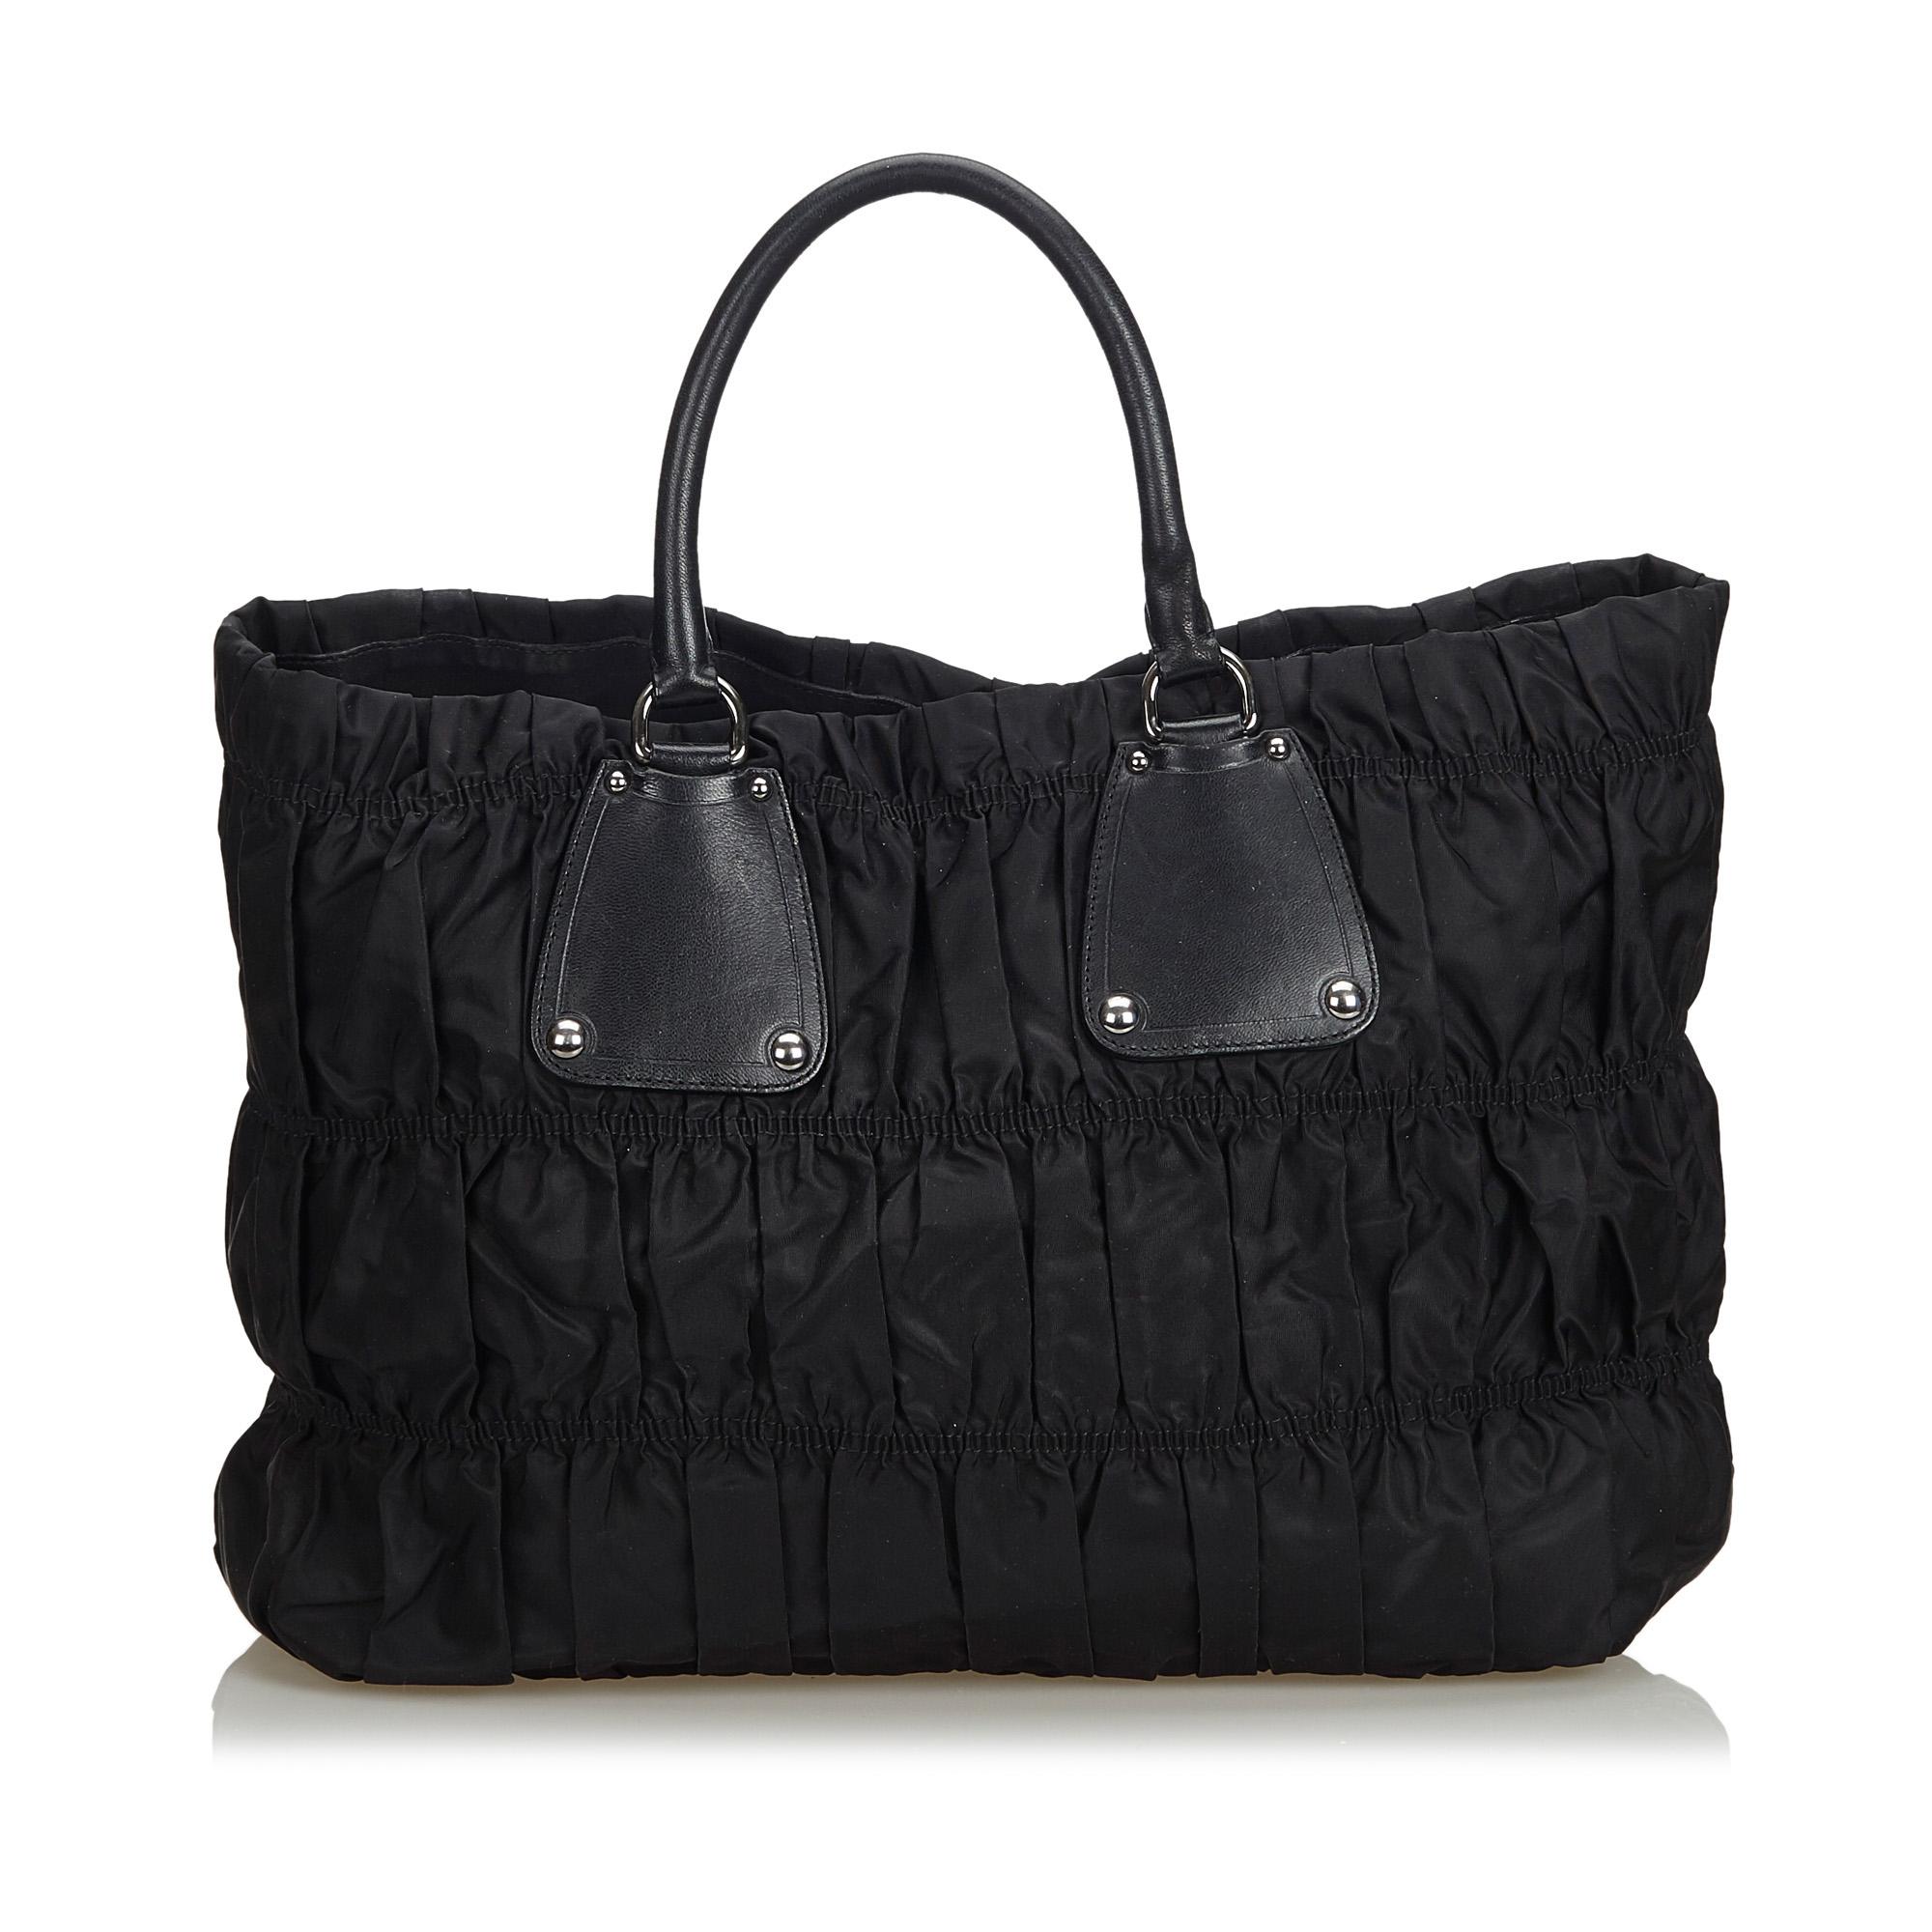 Prada Black Nylon Fabric Gathered Tote Bag Italy w/ Dust Bag In Good Condition For Sale In Orlando, FL